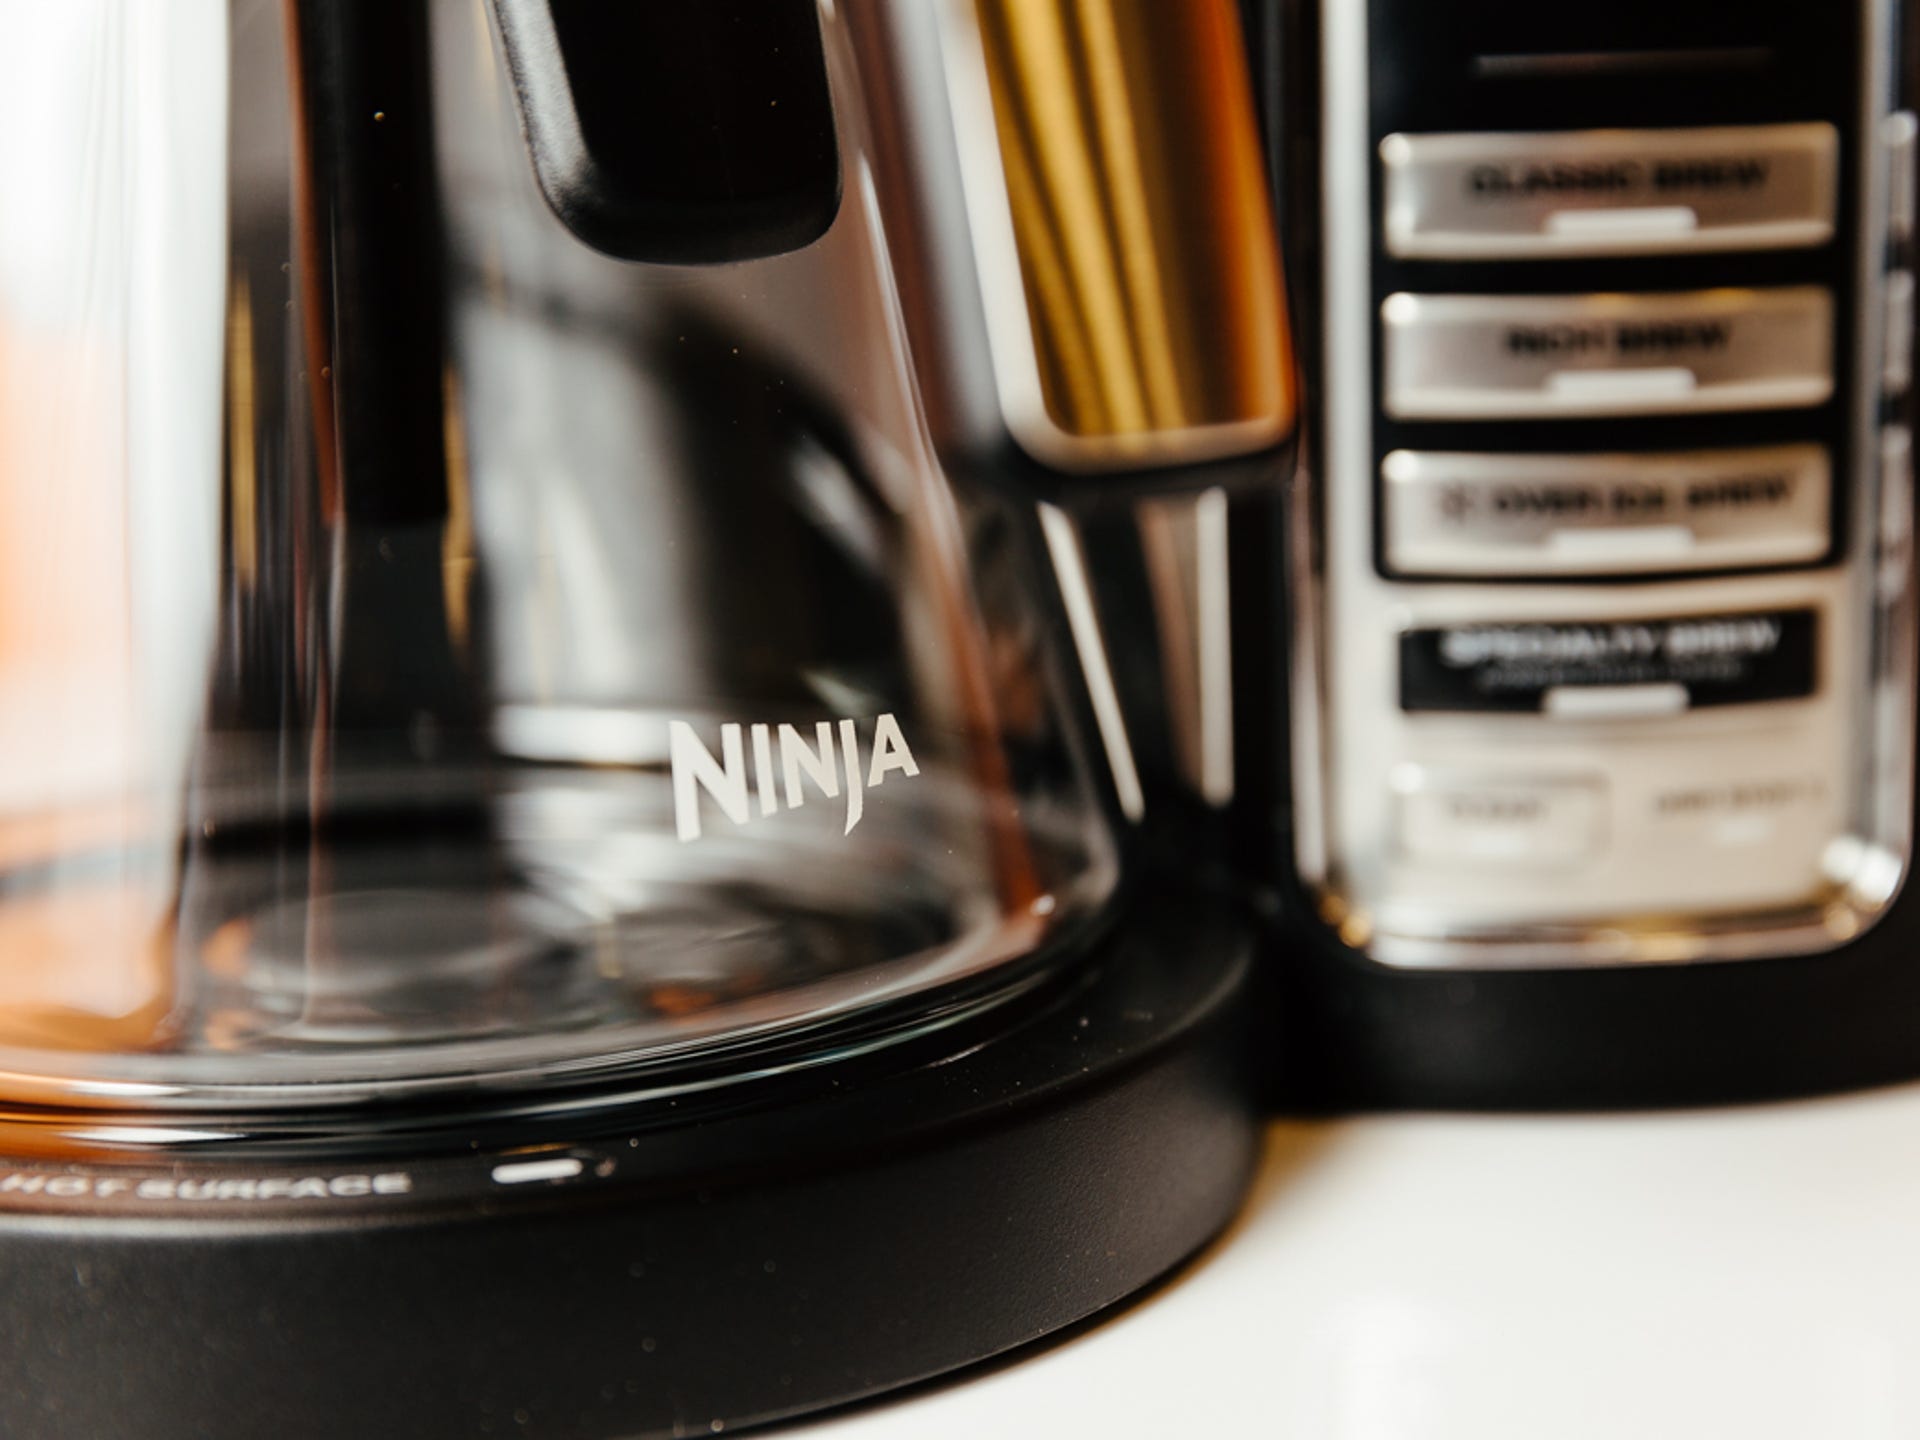 An Honest Review of the Ninja Specialty Coffee Maker: Is it Overpriced? -  Jolly Roast